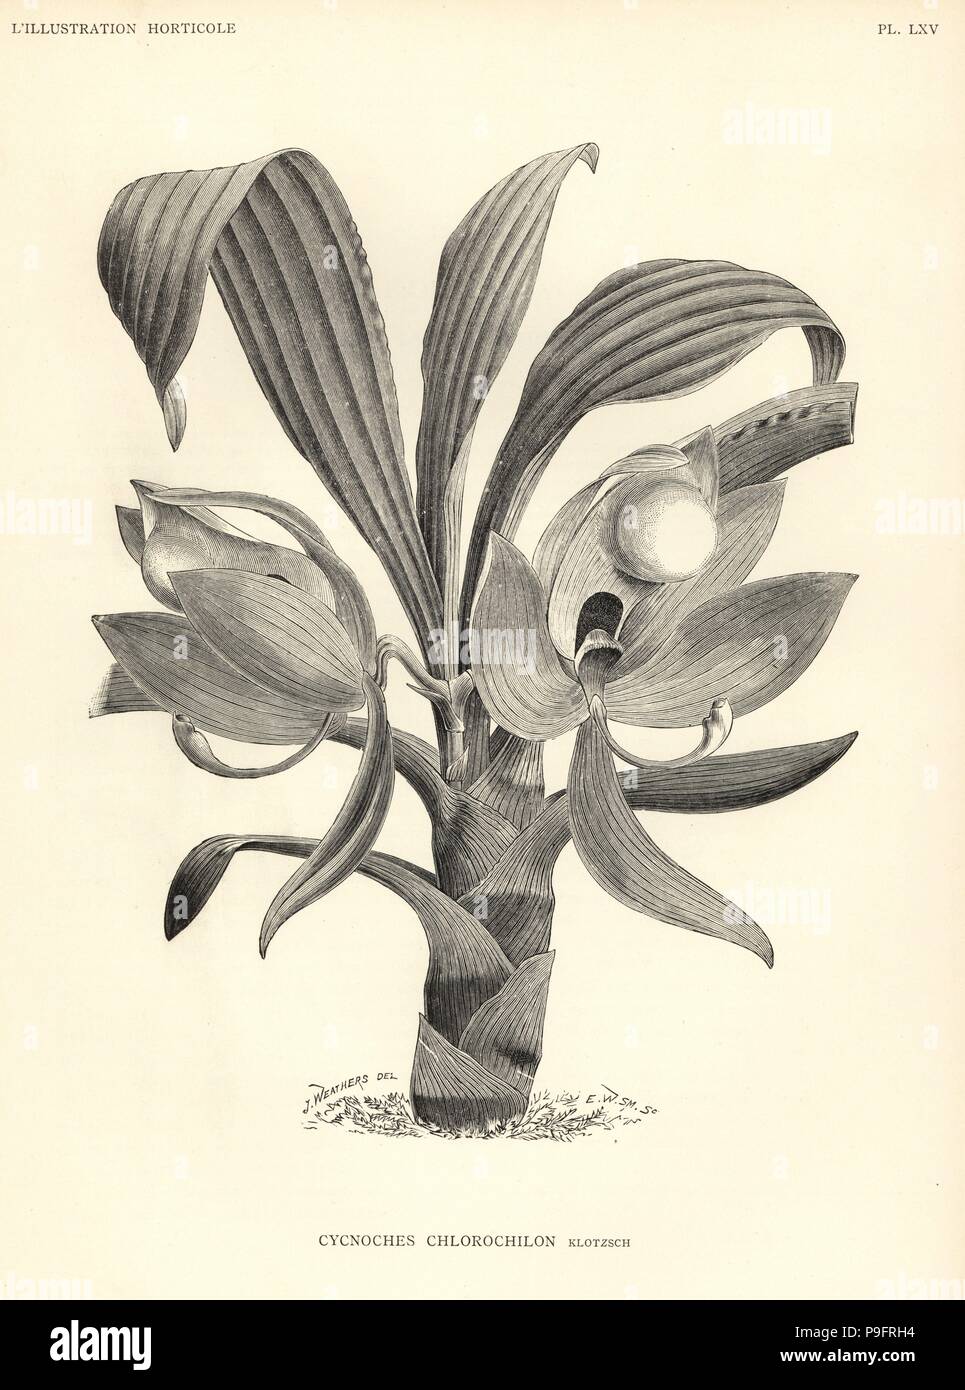 Cycnoches chlorochilon orchid. Woodcut by E.W. Smith after an illustration by J. Weathers from Jean Linden's l'Illustration Horticole, Brussels, 1888. Stock Photo